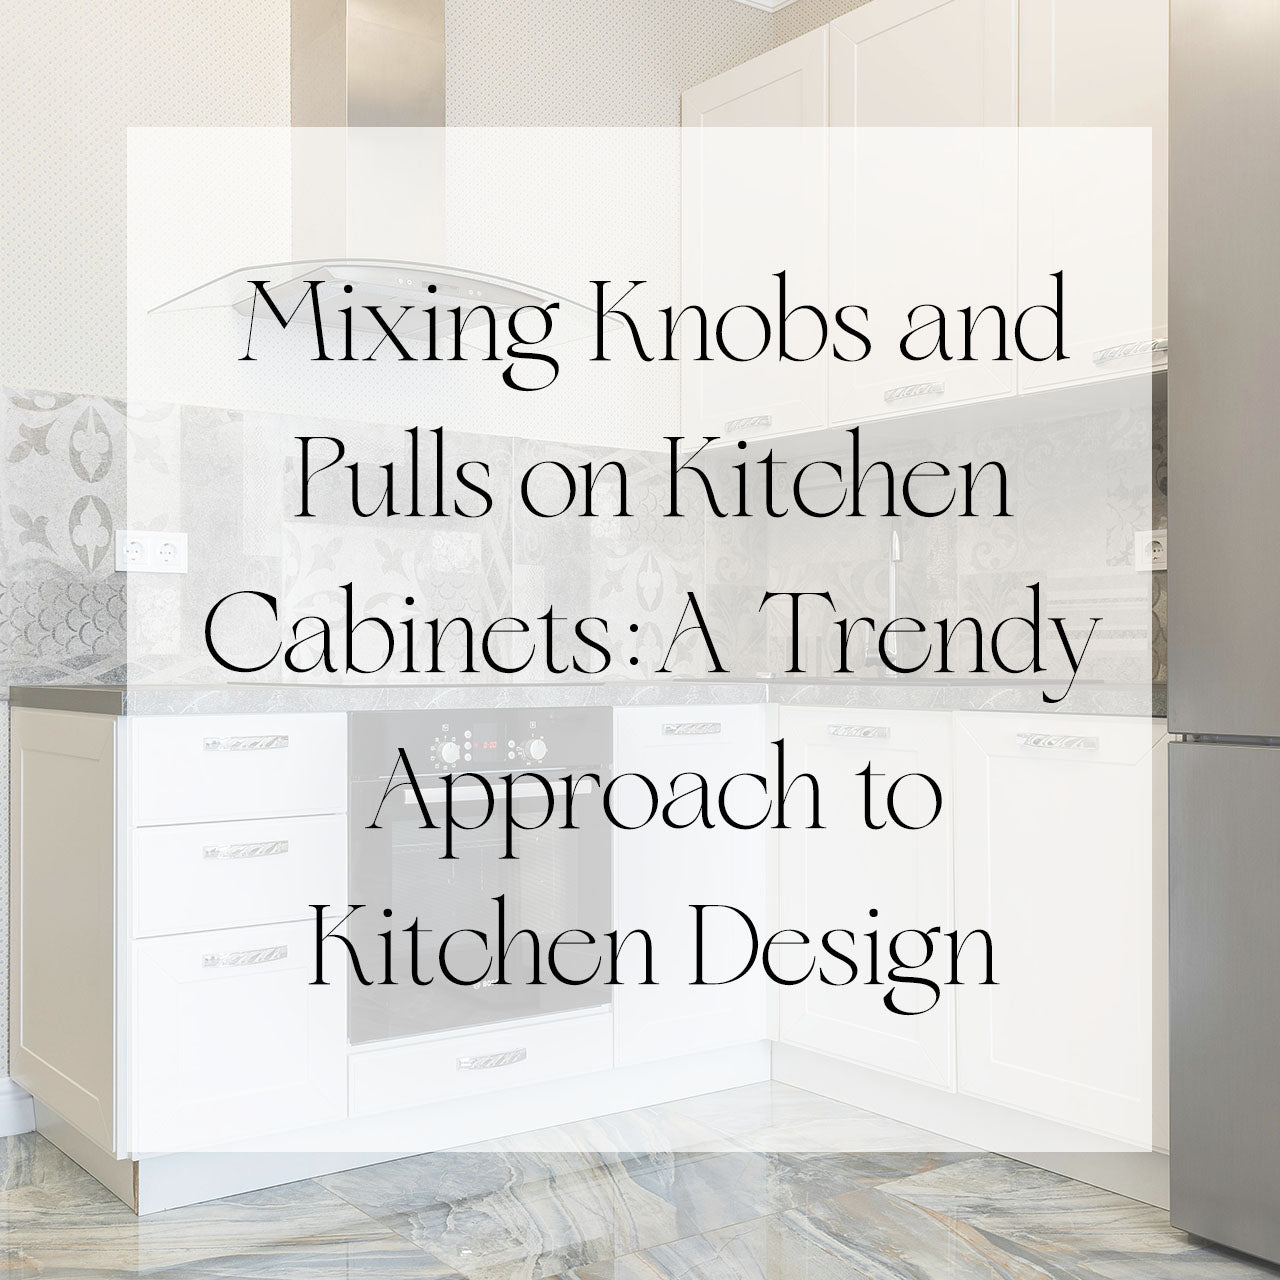 Mixing Knobs and Pulls on Kitchen Cabinets: A Trendy Approach to Kitchen Design